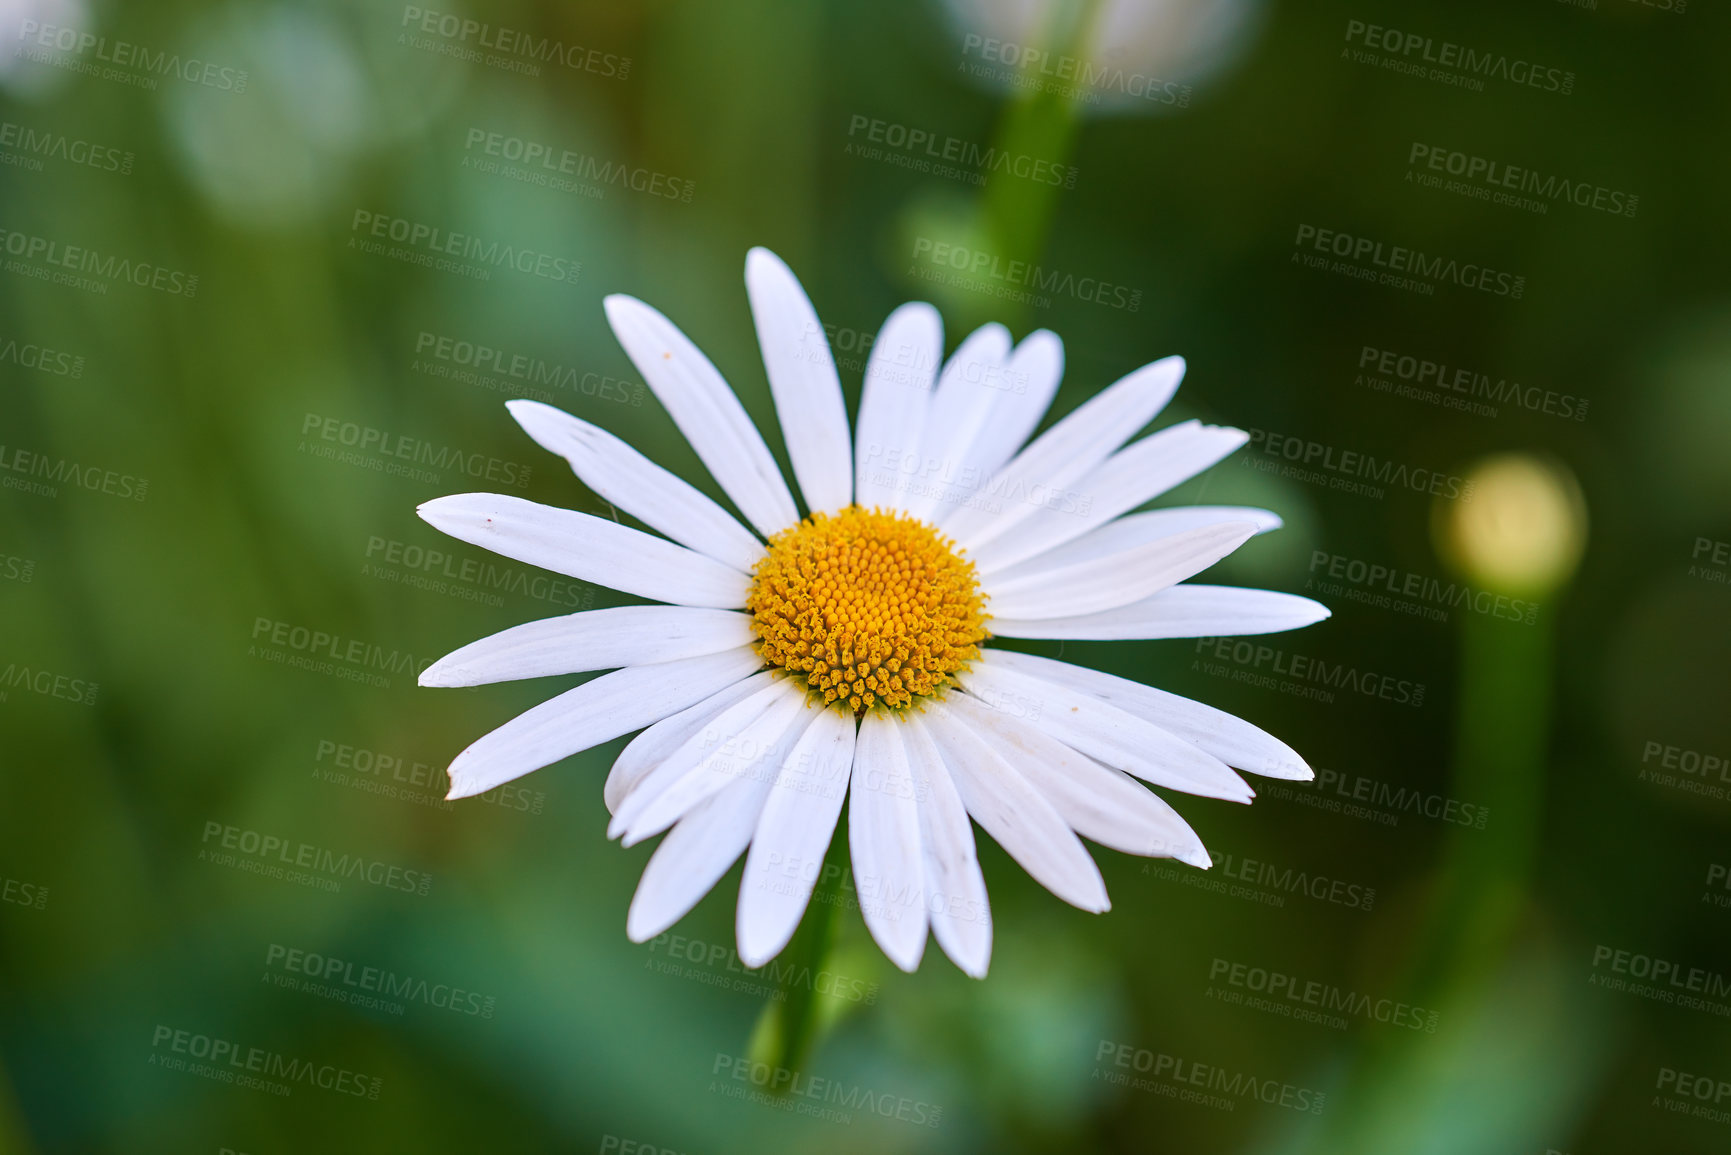 Buy stock photo Closeup detail of beautiful Daisy growing in a garden on a summer day. One vibrant white flower blooming outdoors in nature or a park. A decorative and bright plant blossoming with a bush background